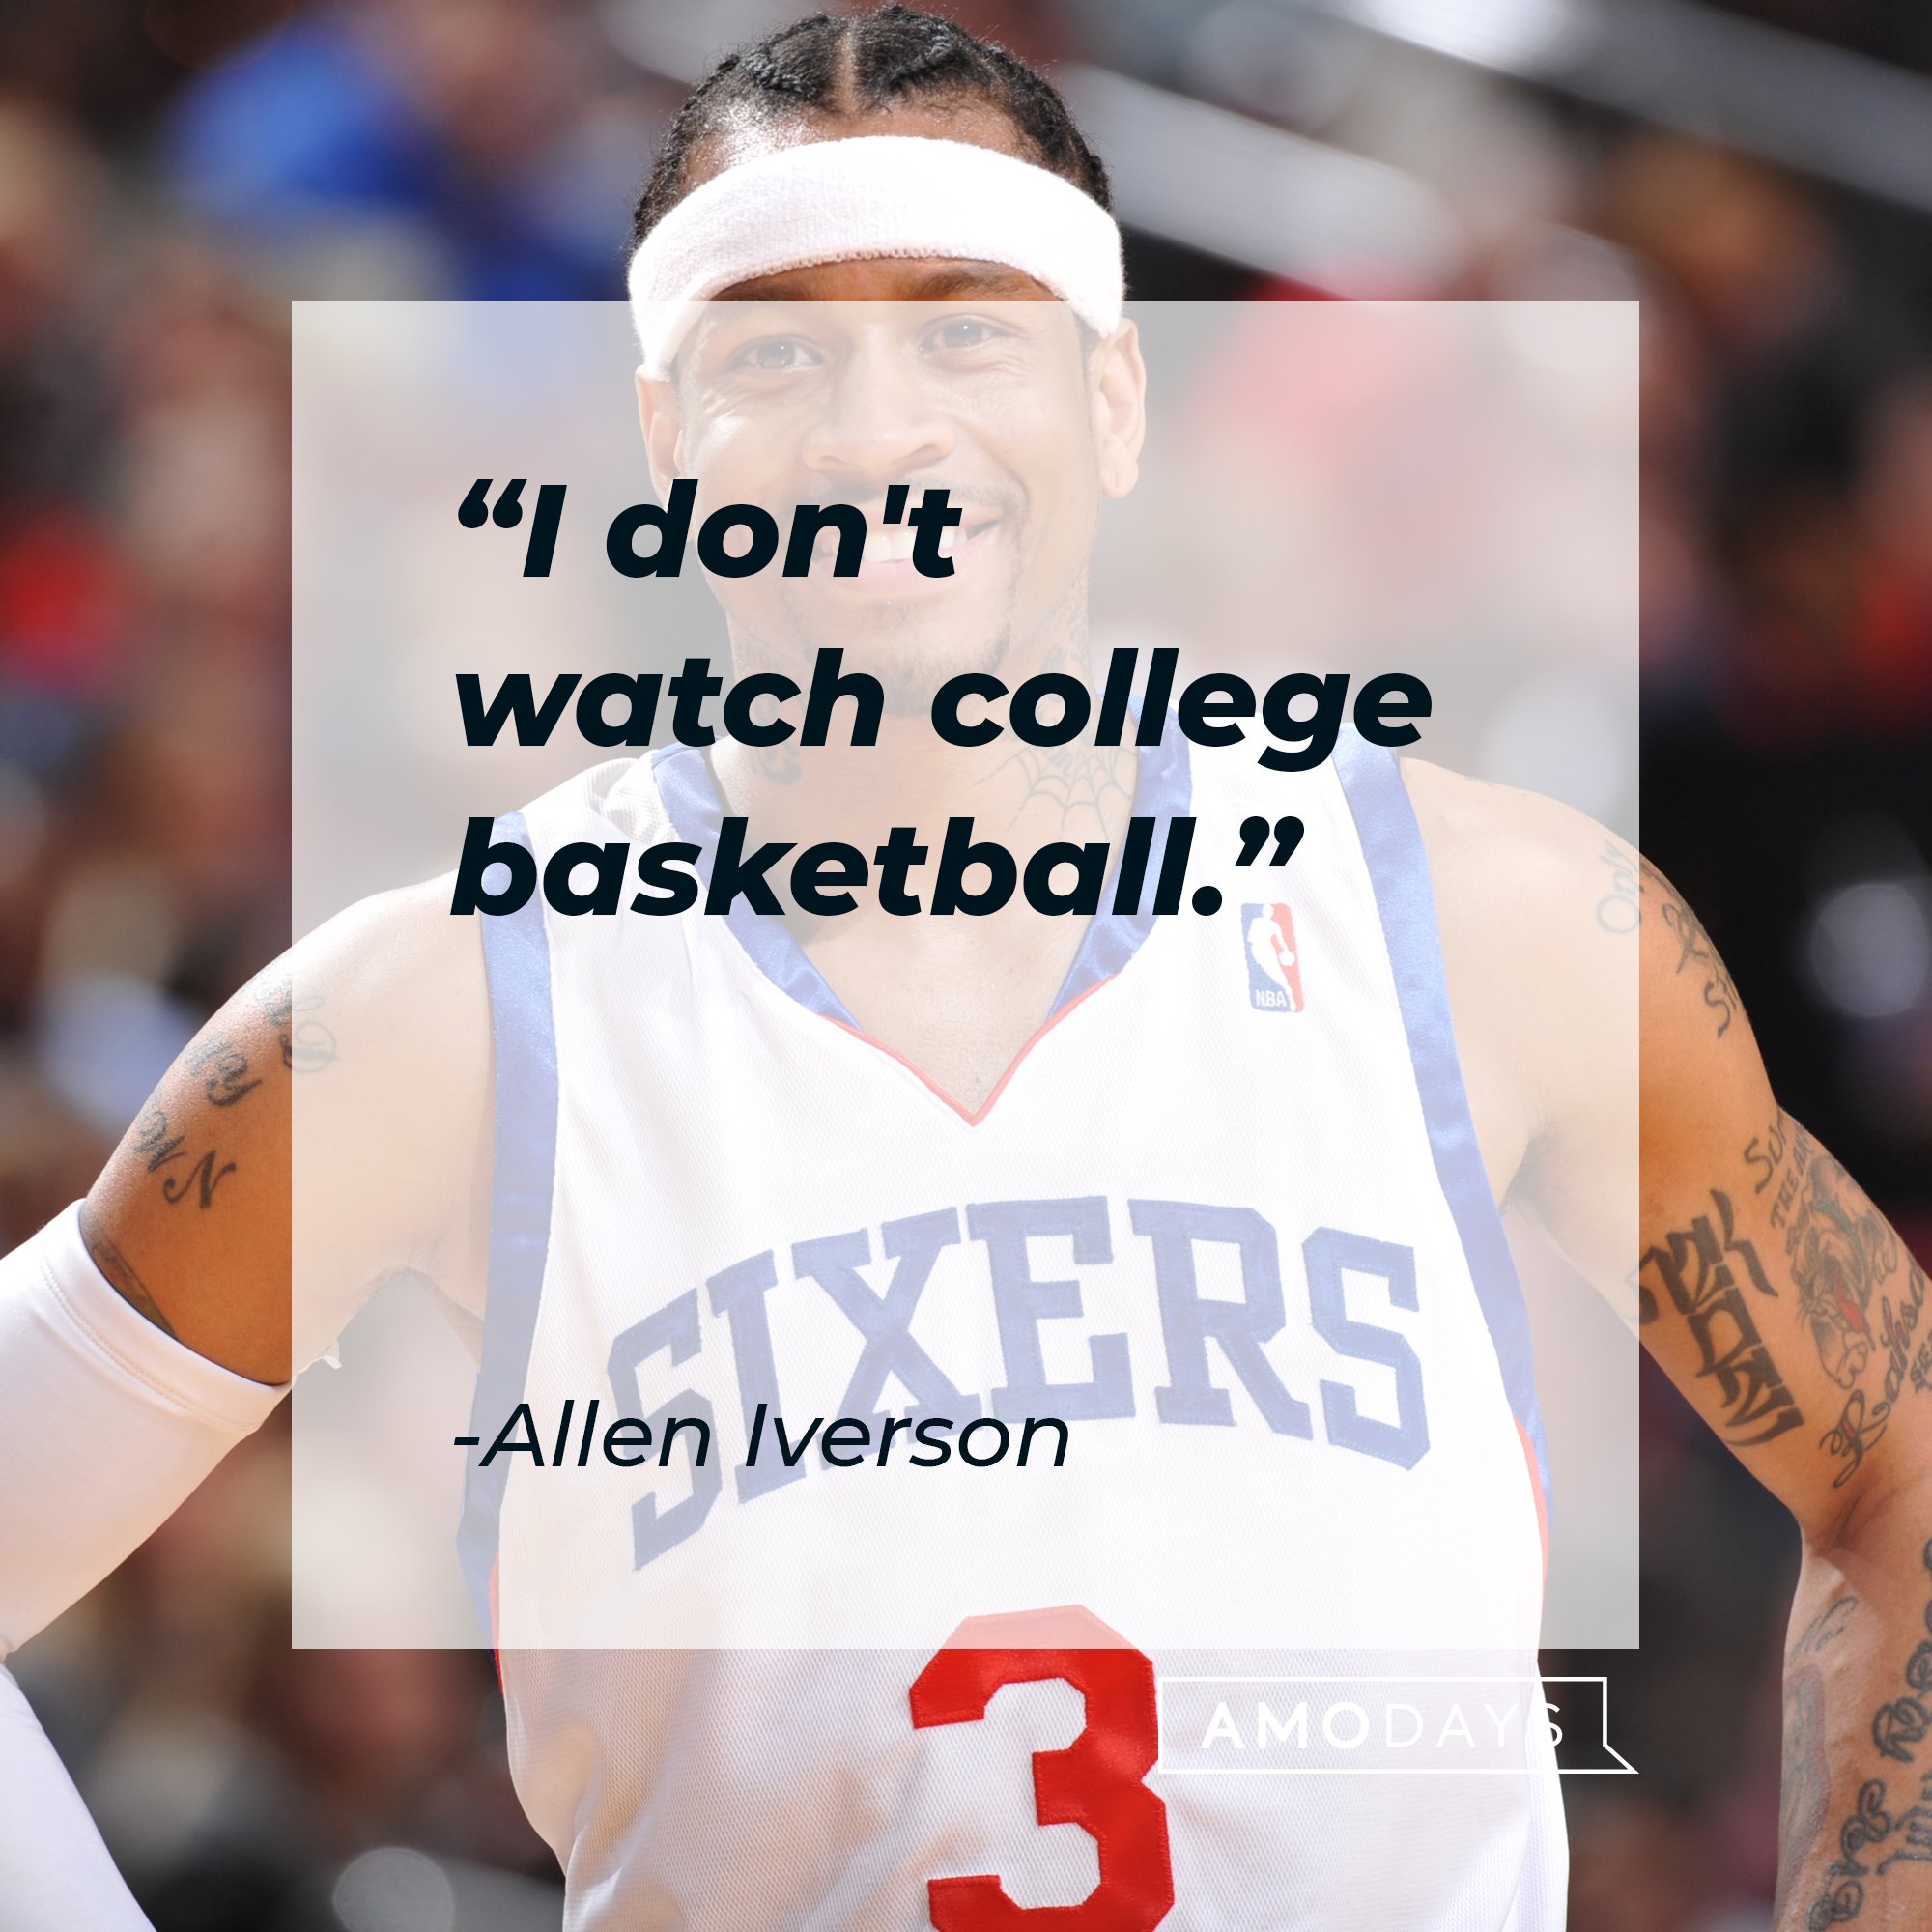 Allen Iverson's quote: "I don't watch college basketball." | Image: AmoDays